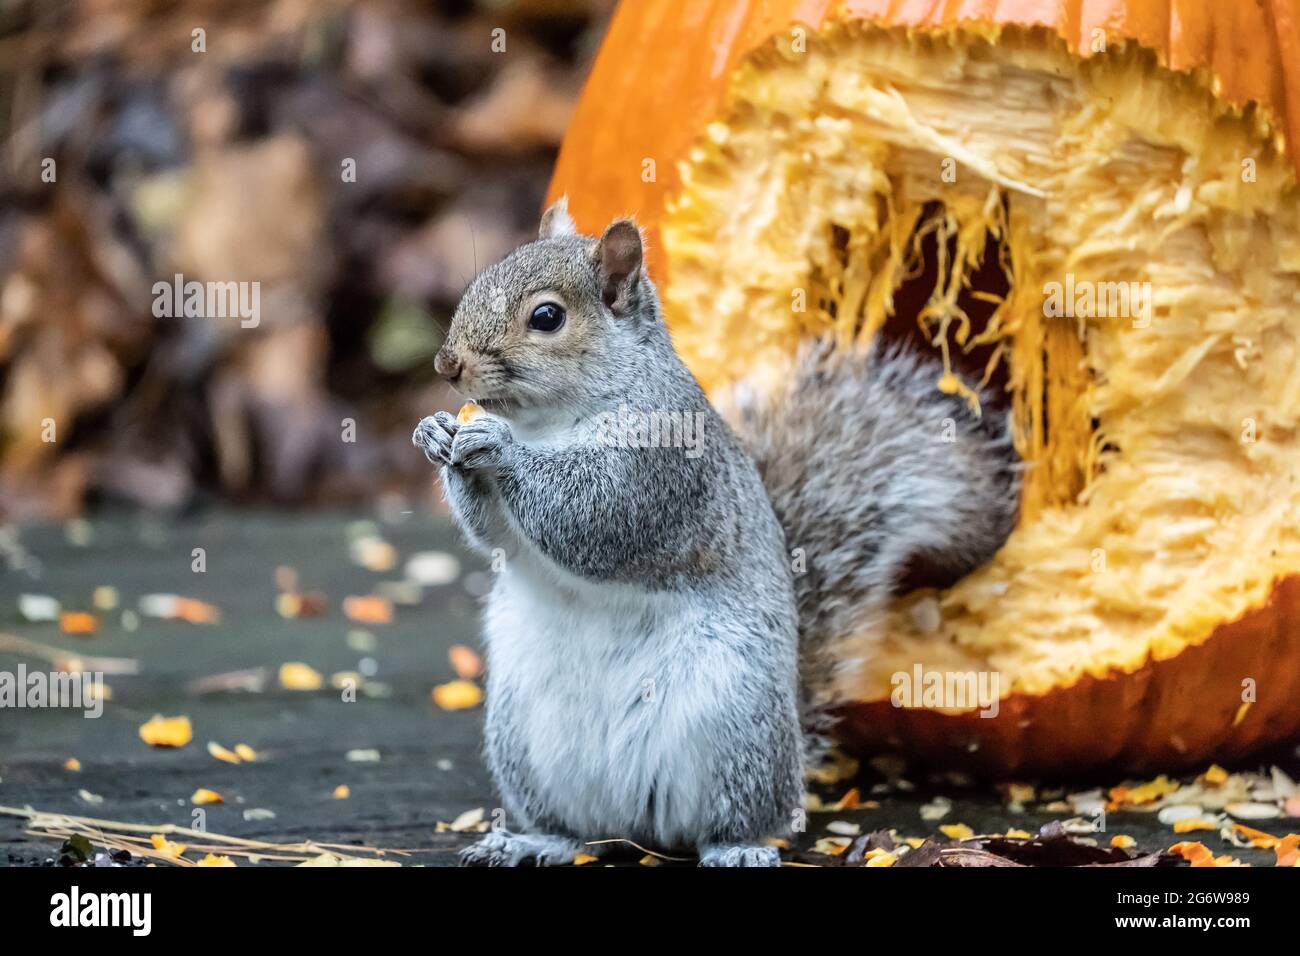 A hungry gray squirrel helps himself to pumpkin seeds from Halloween Pumpkin Stock Photo